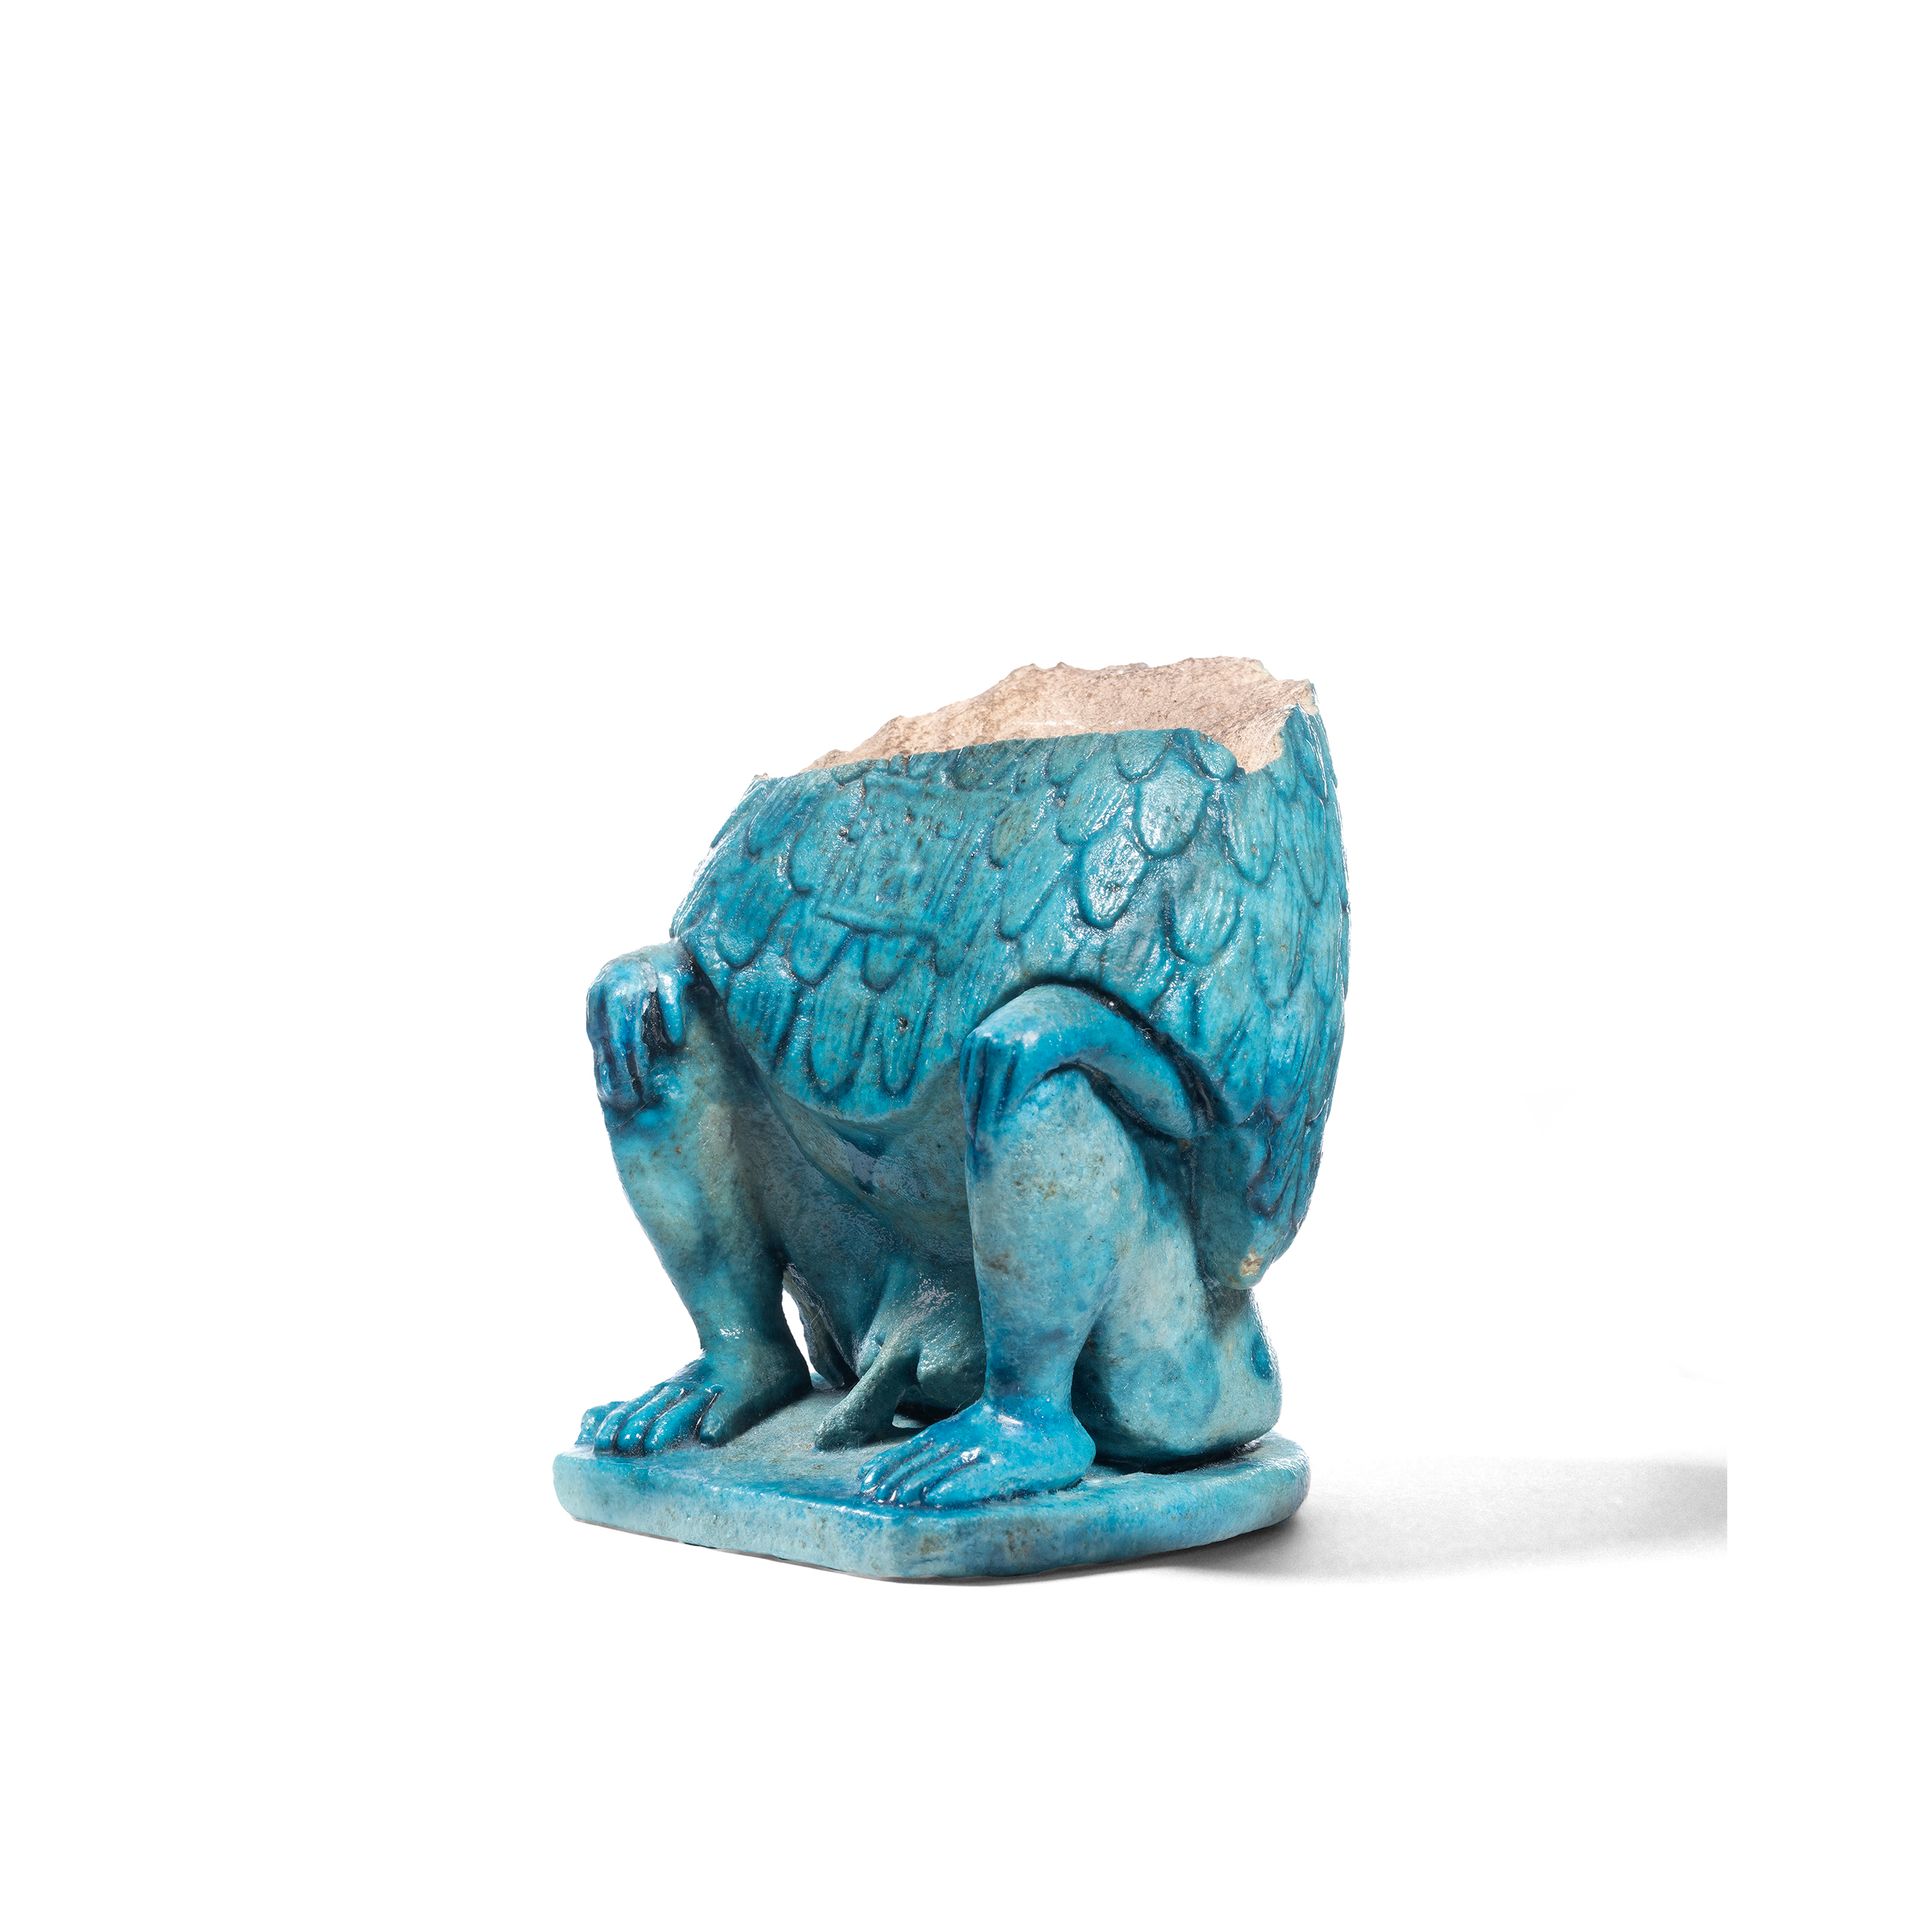 Null STATUETTE OF THOT BABOON
Siliceous earthenware with blue glaze.
Missing the&hellip;